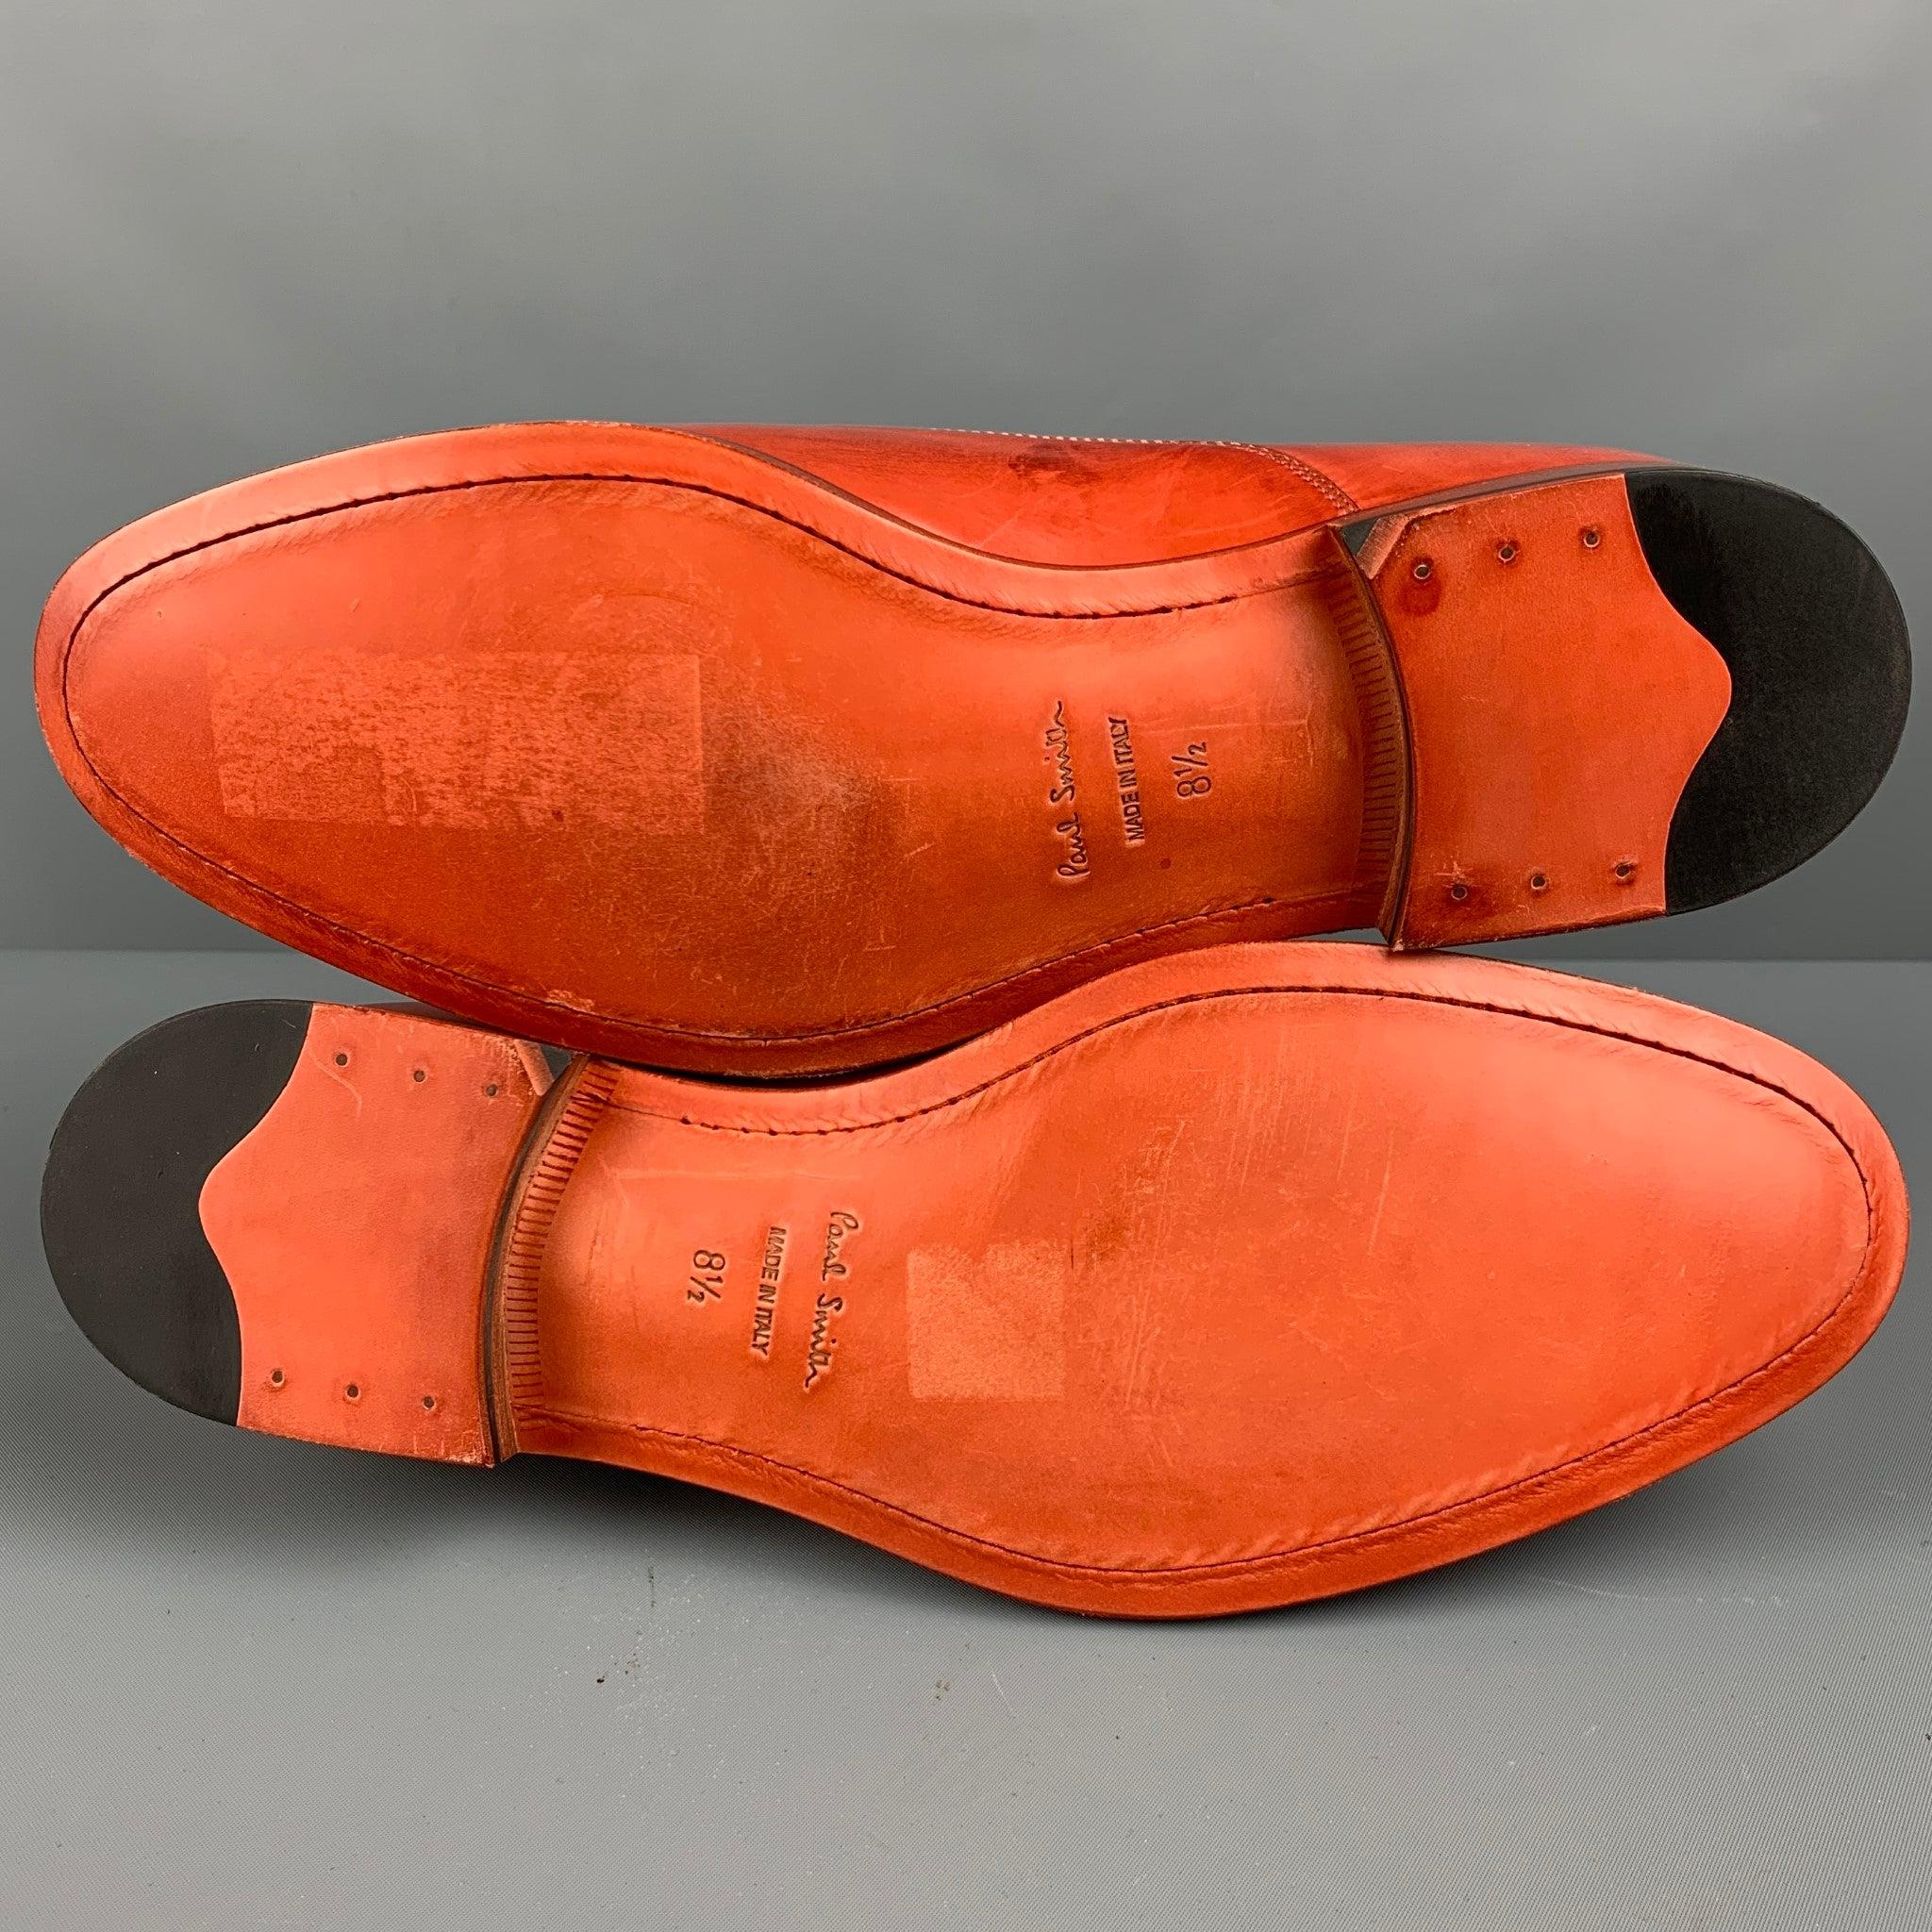 PAUL SMITH Size 8.5 Orange Perforated Leather Cap Toe Lace Up Shoes For Sale 2